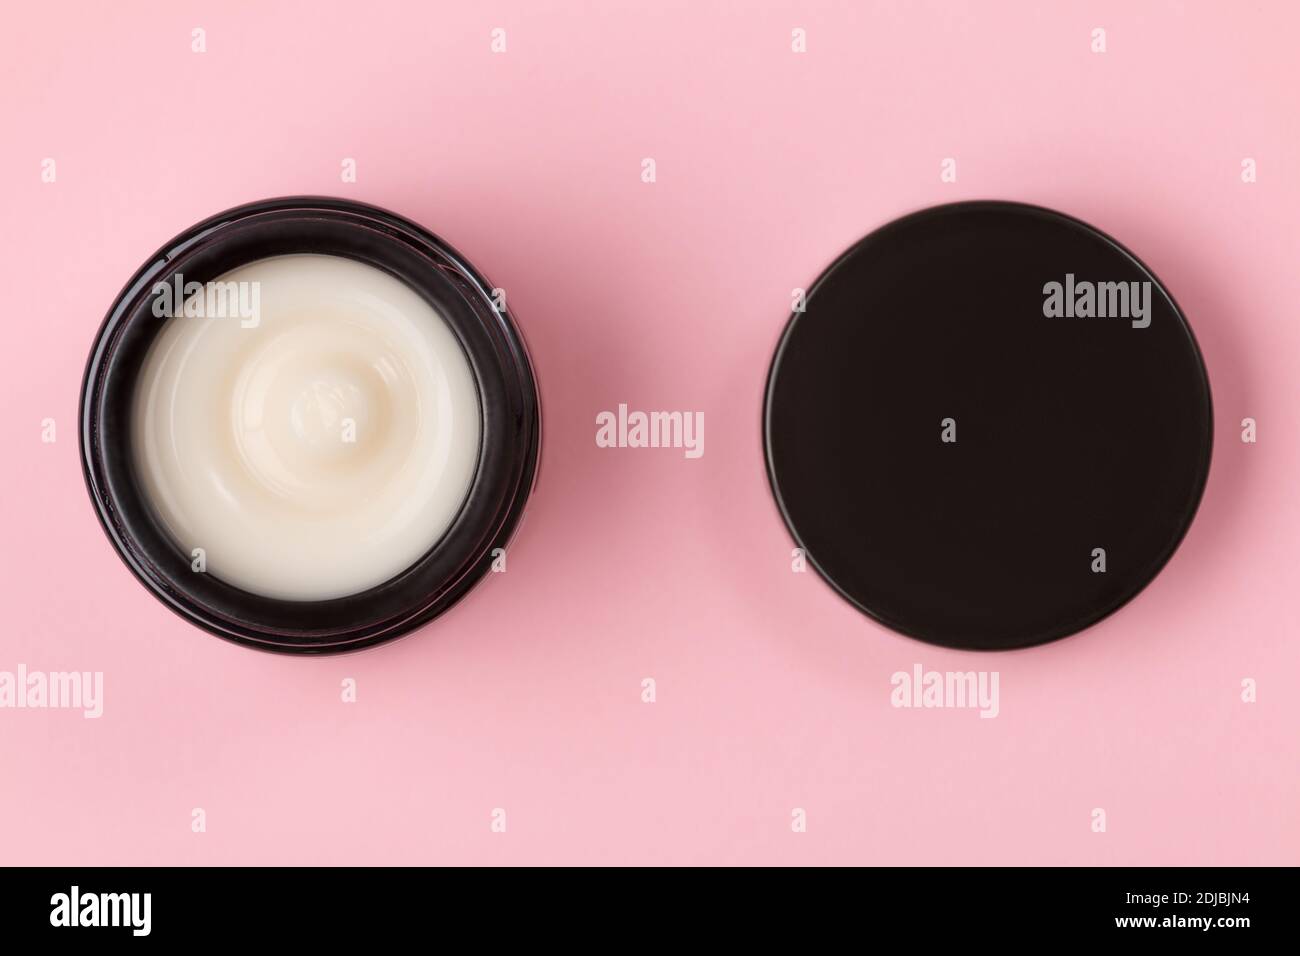 Cosmetic face cream in an open jar on a pink background. Stock Photo